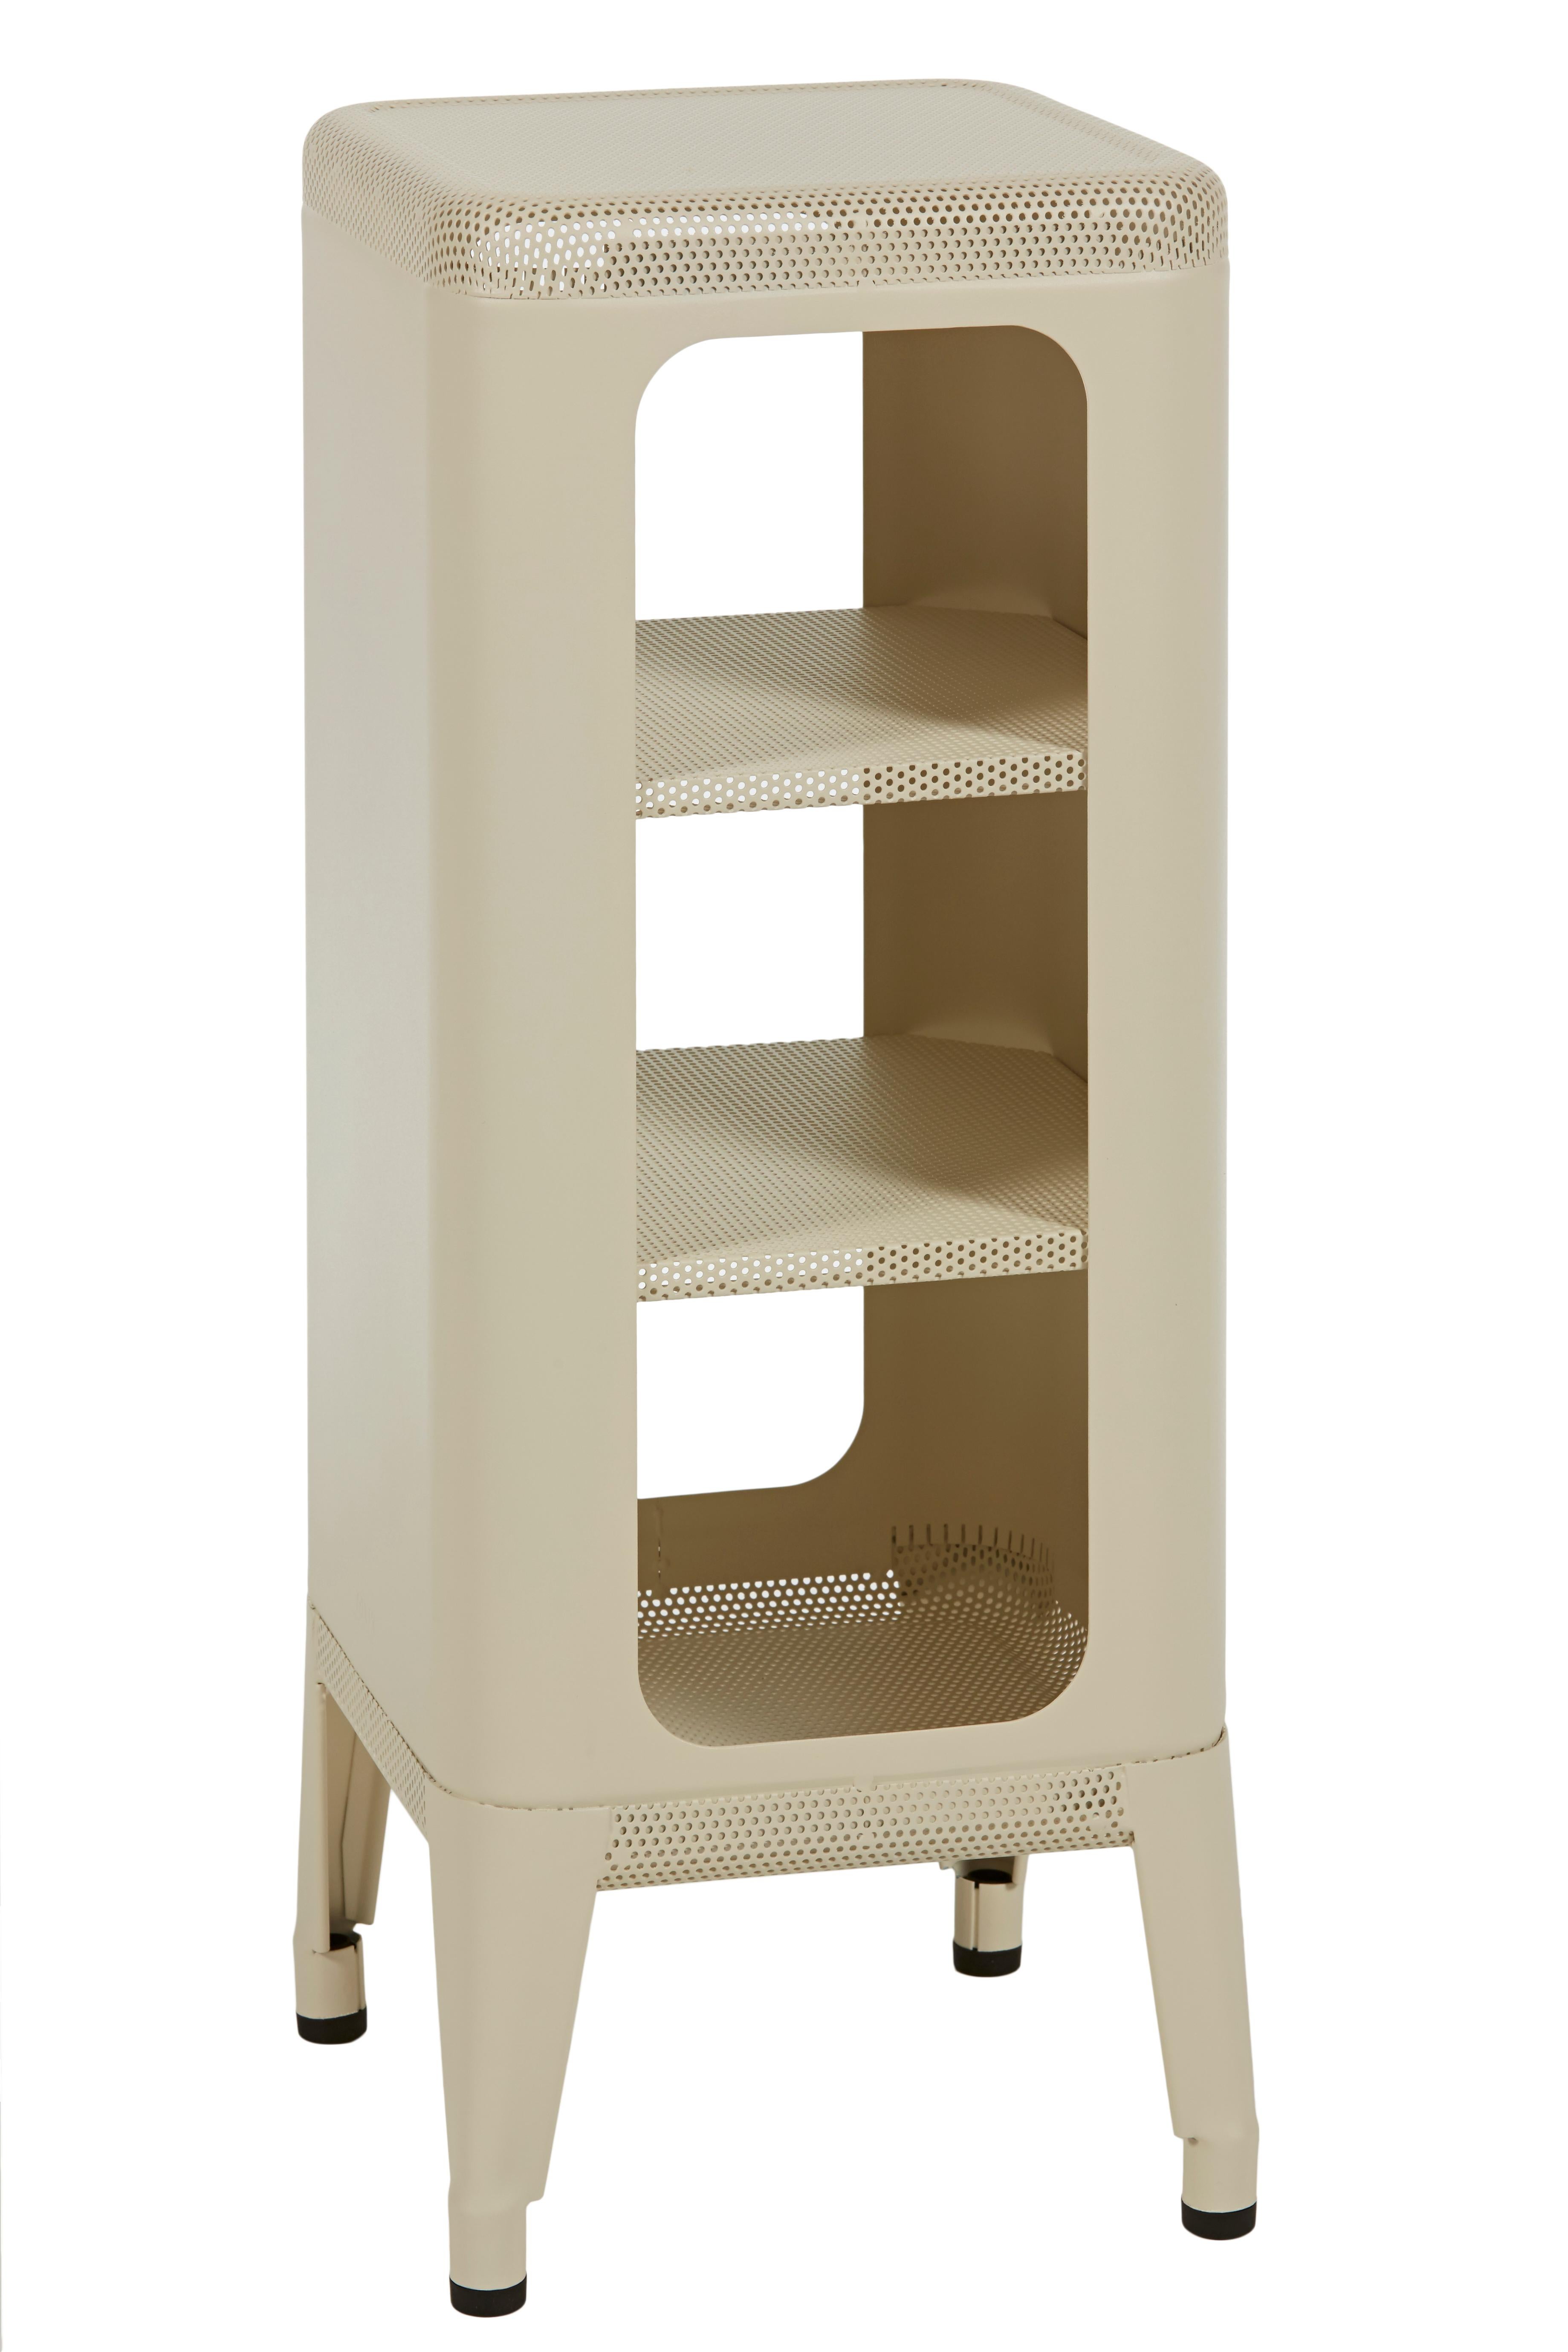 For Sale: White (Ivoire) Stool Shelf 750 Perforated in Essential Colors by Frederic Gaunet and Tolix 3